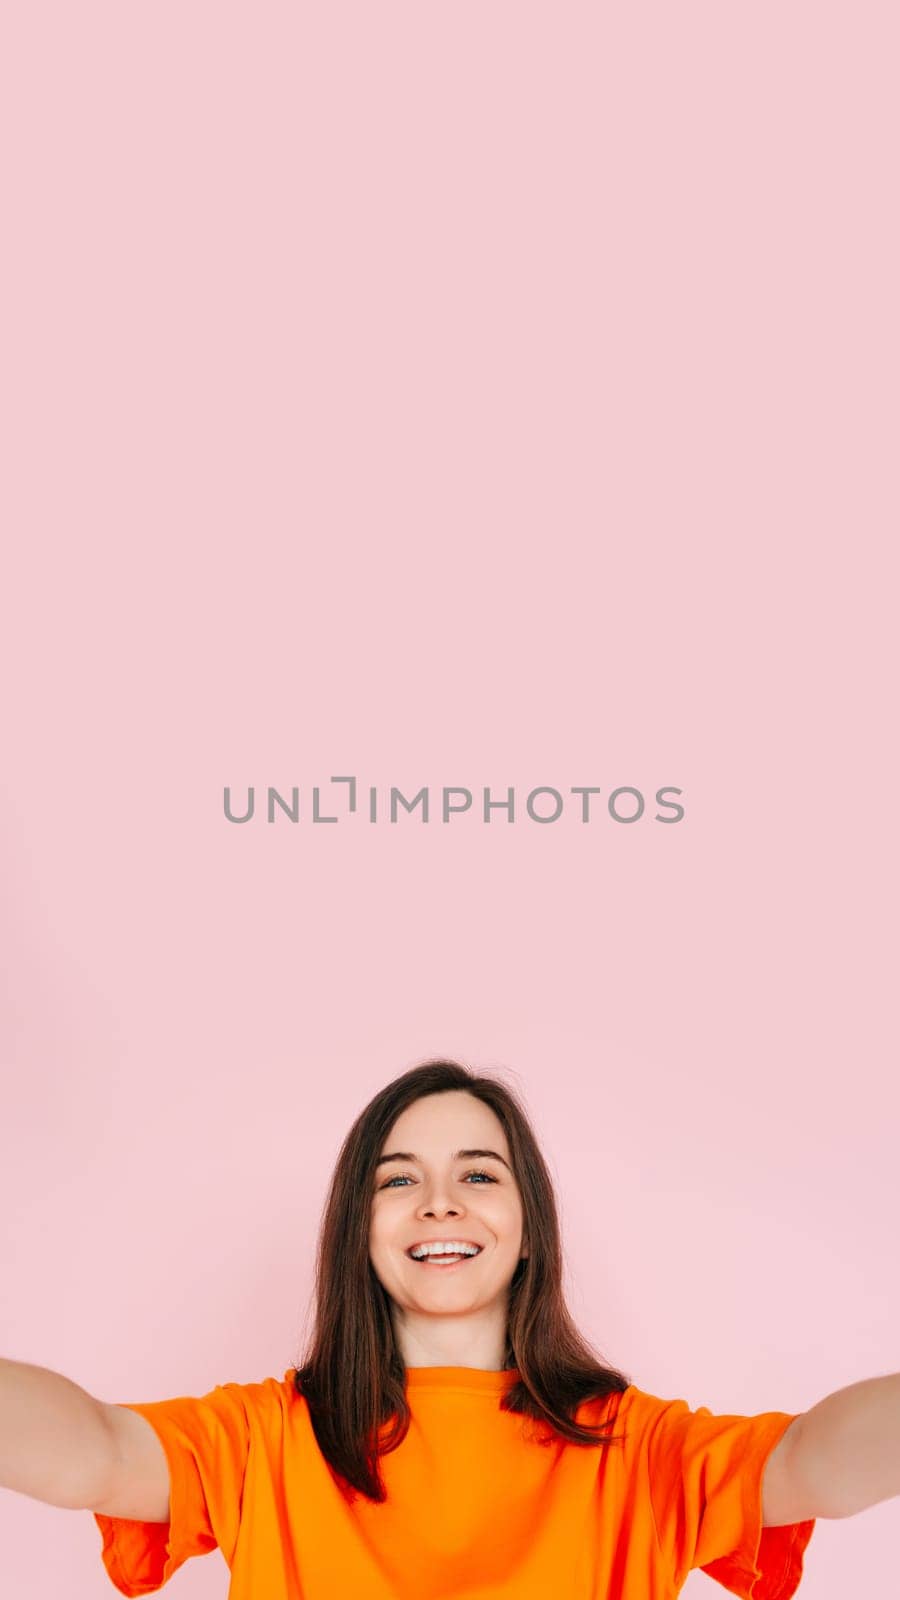 Vibrant Social Media Storytelling: Beautiful and Joyful Woman in Colorful Attire, Recording Instagram/Twitter Post - Influencer and Informant Concept, Isolated on Pink Background. by ViShark